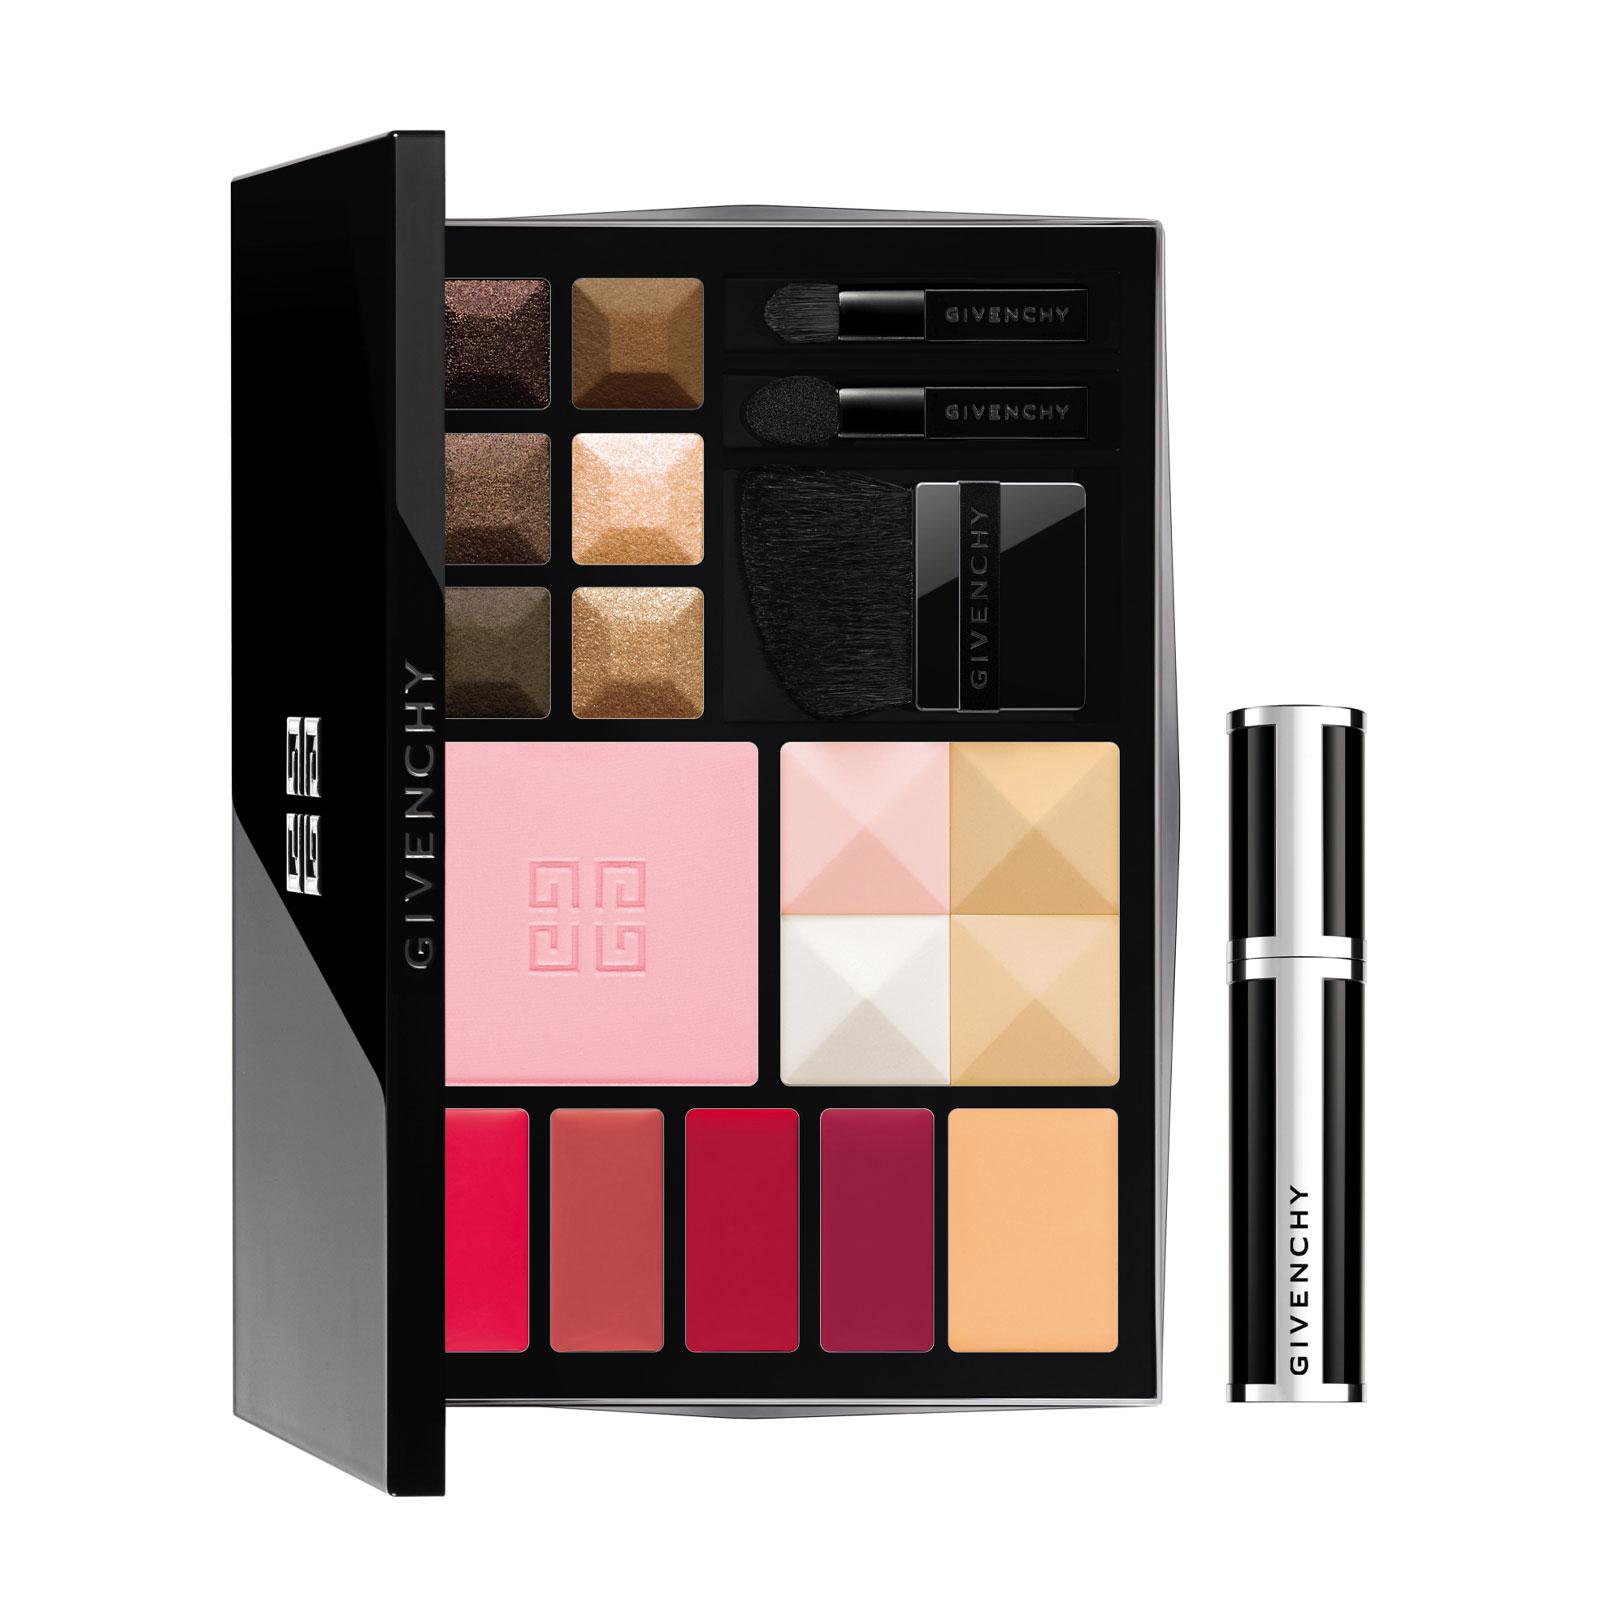 givenchy makeup essentials palette with travel mascara